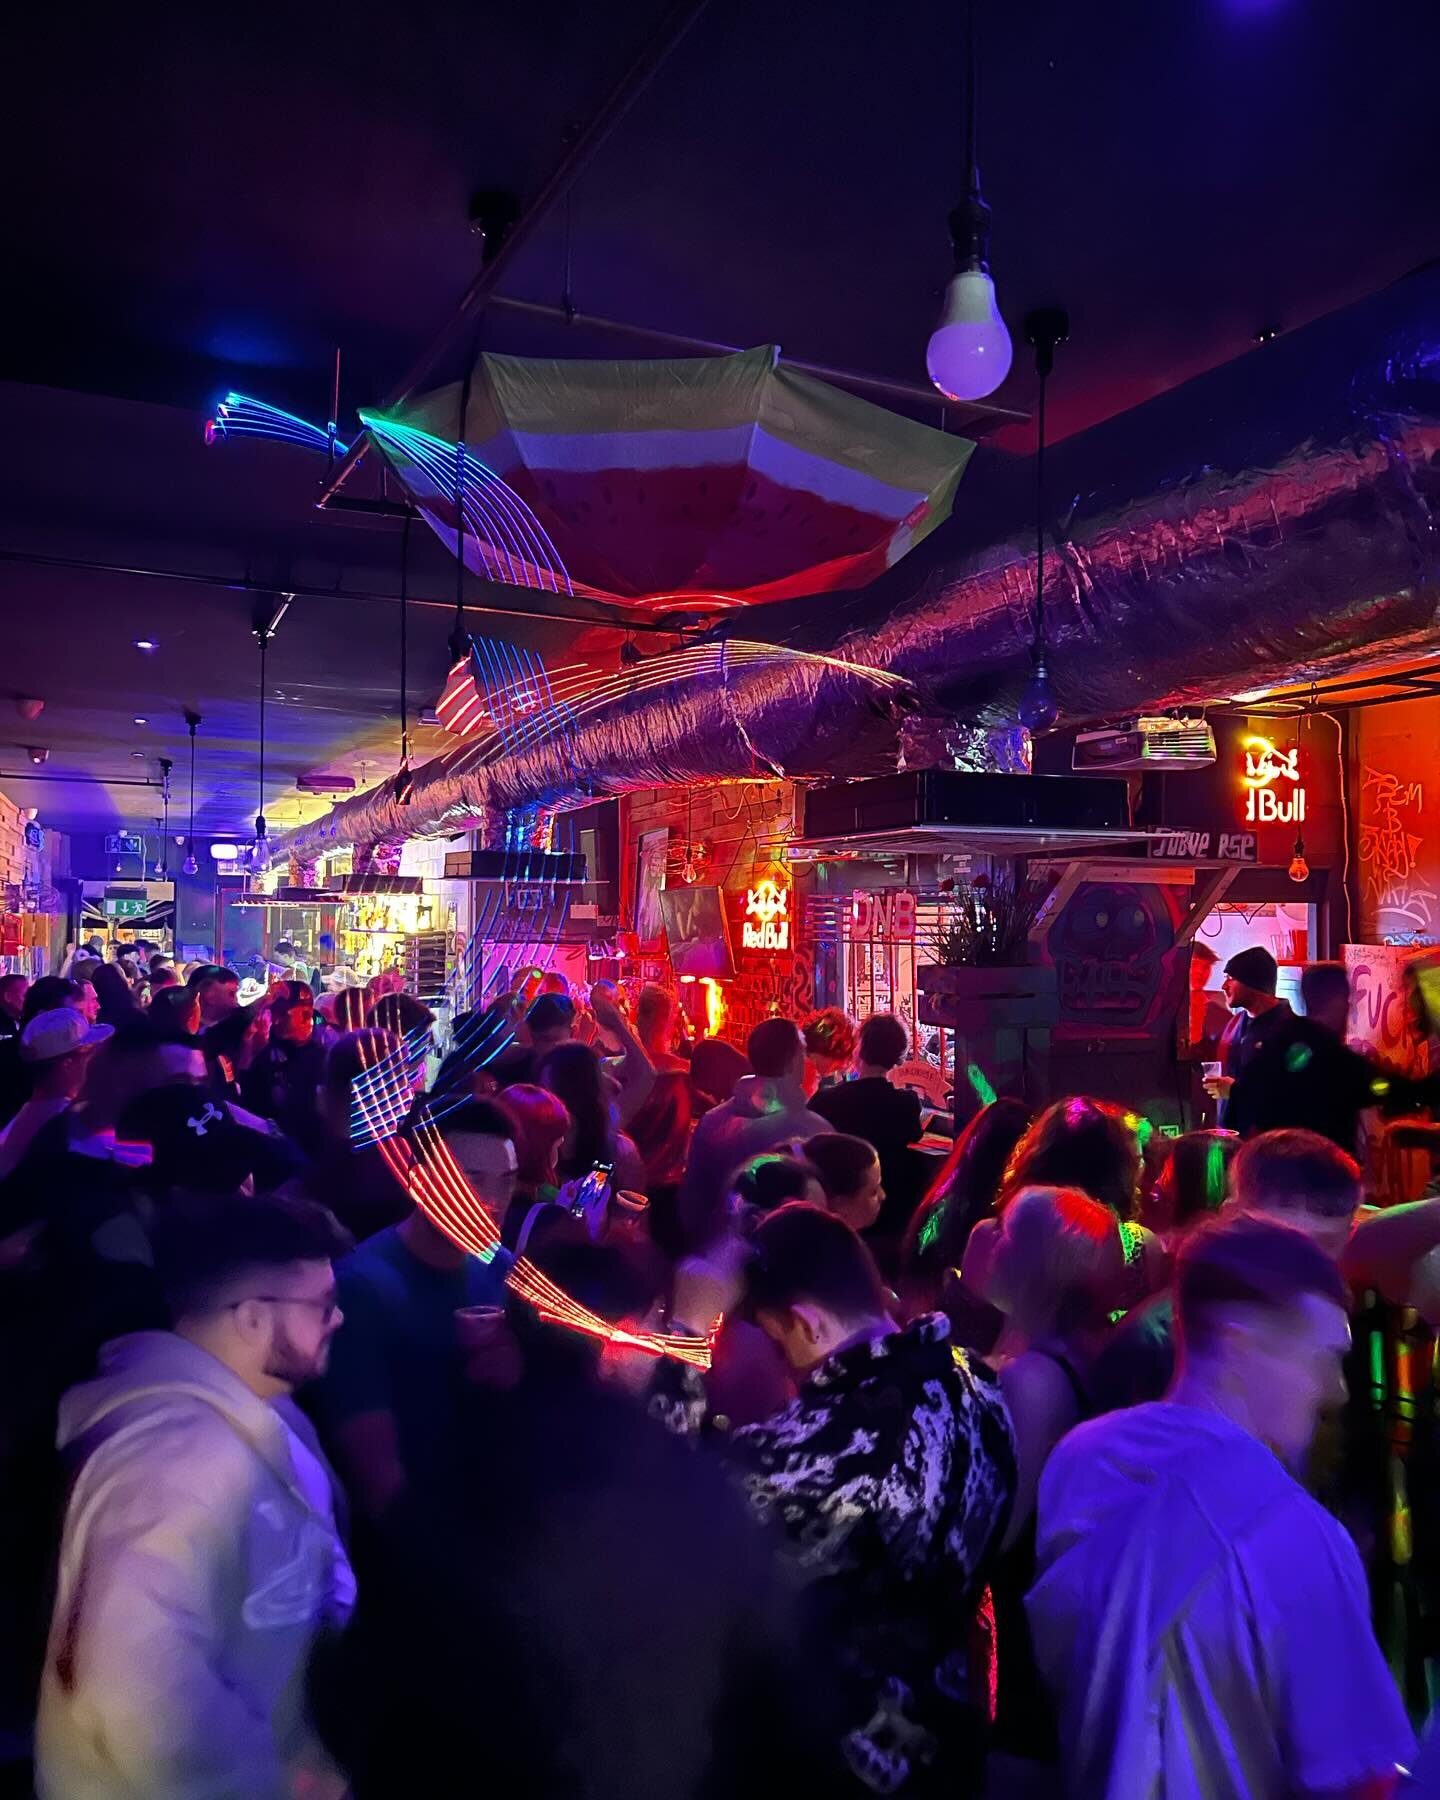 6 Nations Recap!
🏴󠁧󠁢󠁷󠁬󠁳󠁿🇫🇷🇮🇹
❤️❤️❤️ #rugby #bar #6nations #2024 #hostel #rave #cardiff #wales #france #italy #vibes #music #pints #party #club #dance #city